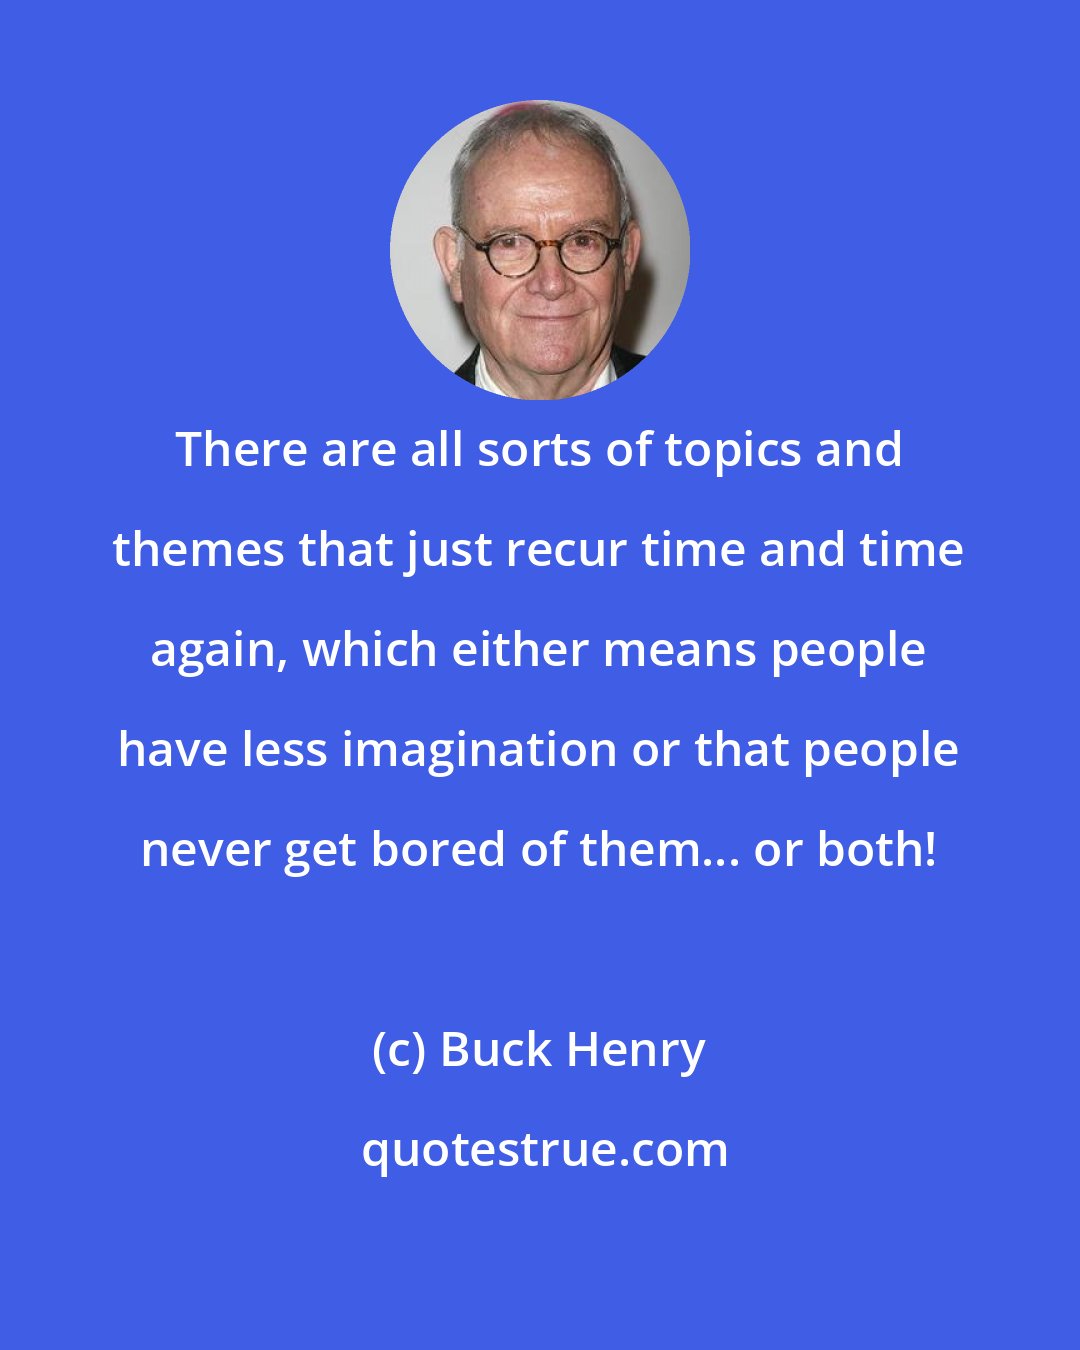 Buck Henry: There are all sorts of topics and themes that just recur time and time again, which either means people have less imagination or that people never get bored of them... or both!